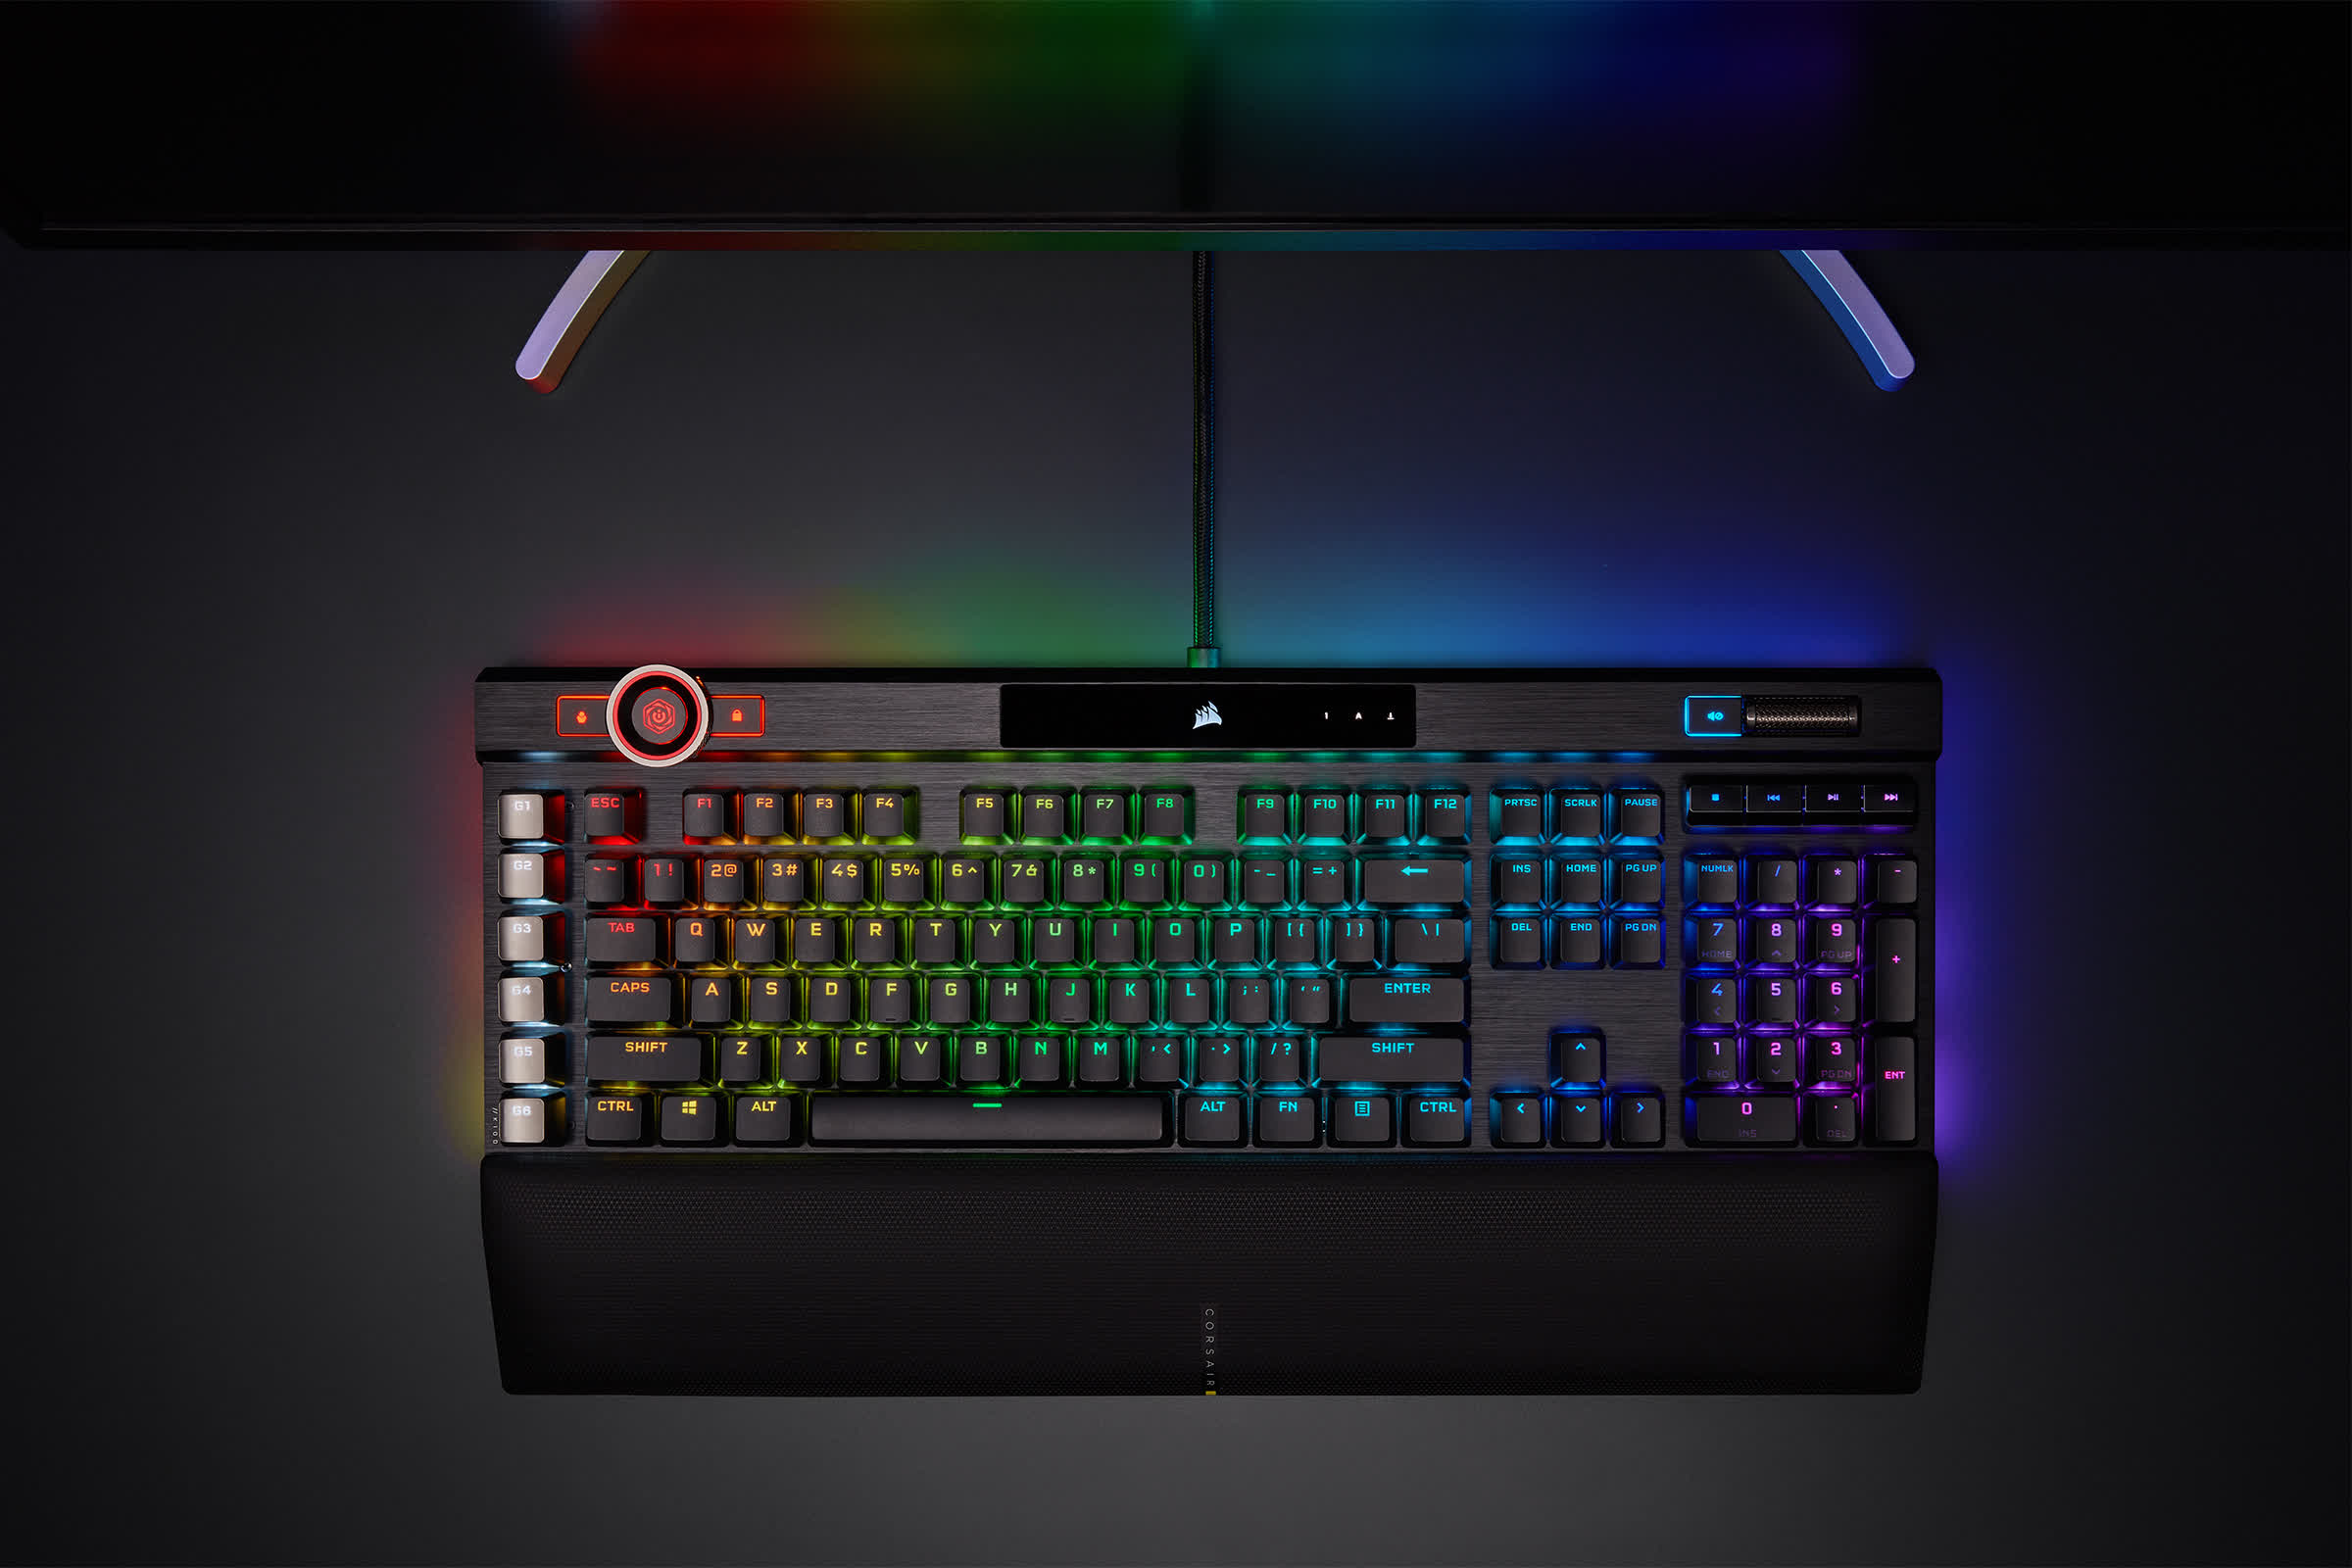 Corsair's K100 RGB mechanical gaming keyboard is loaded with bells and whistles